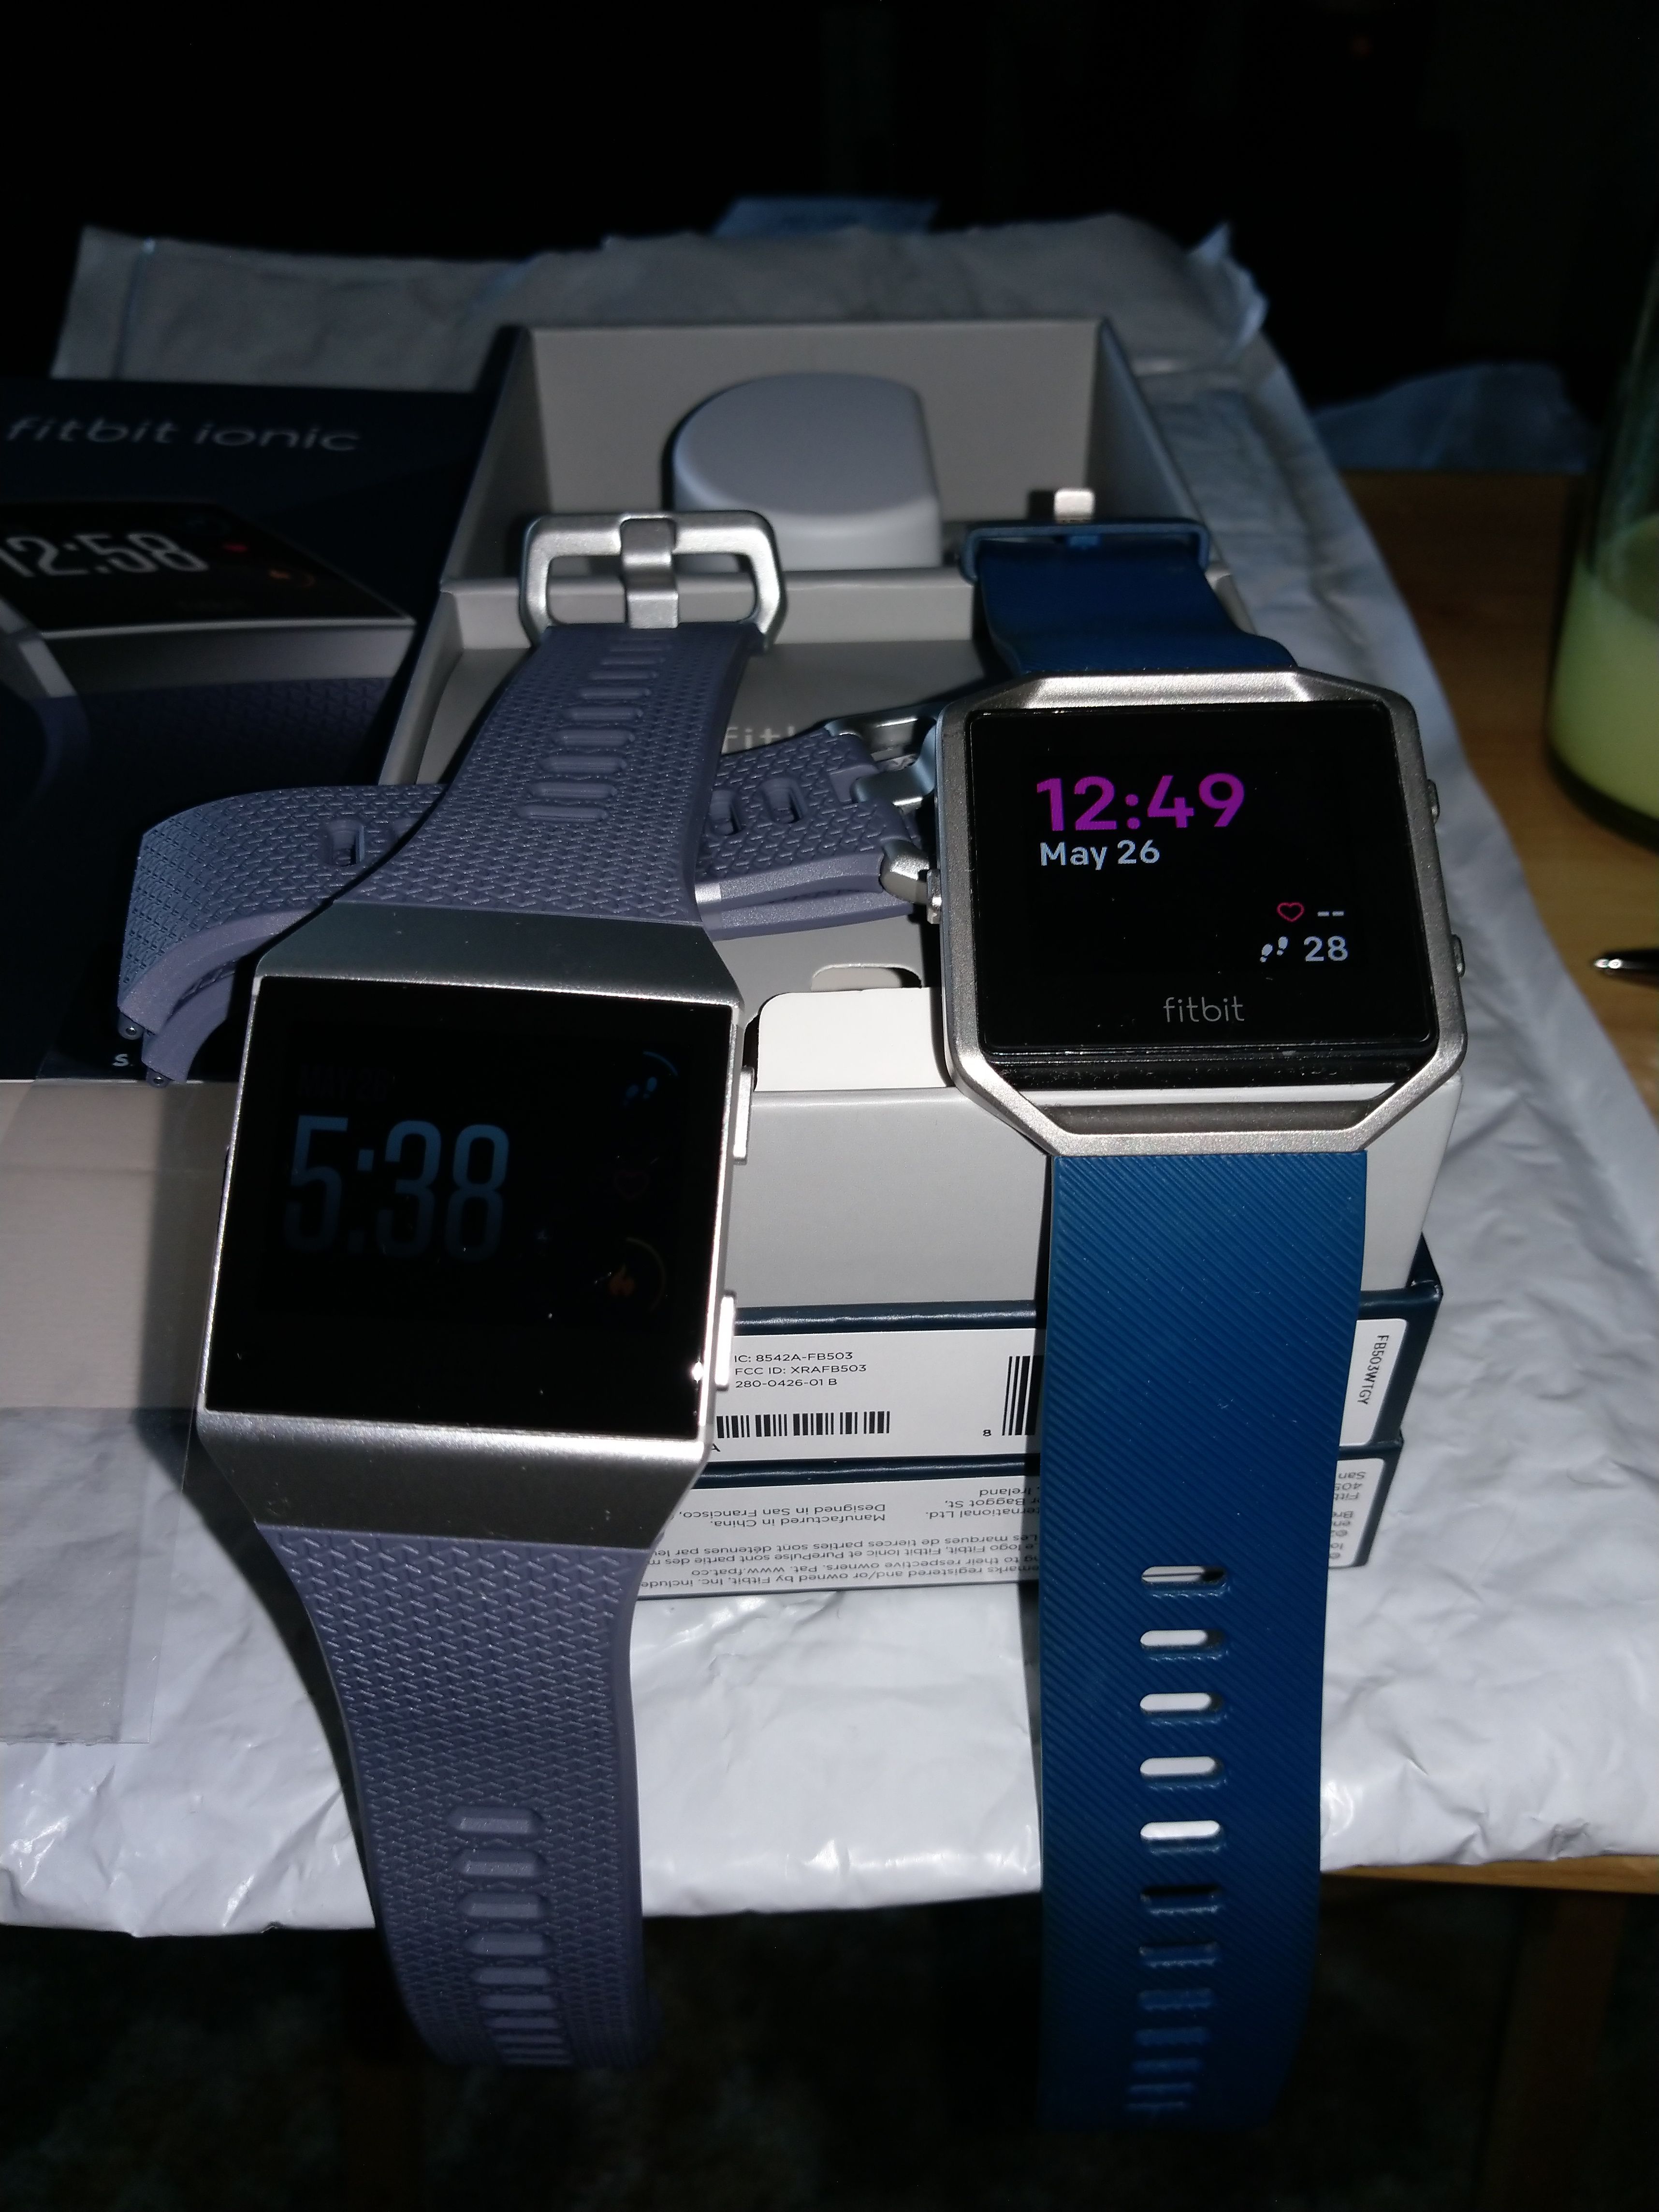 fitbit blaze stopped syncing